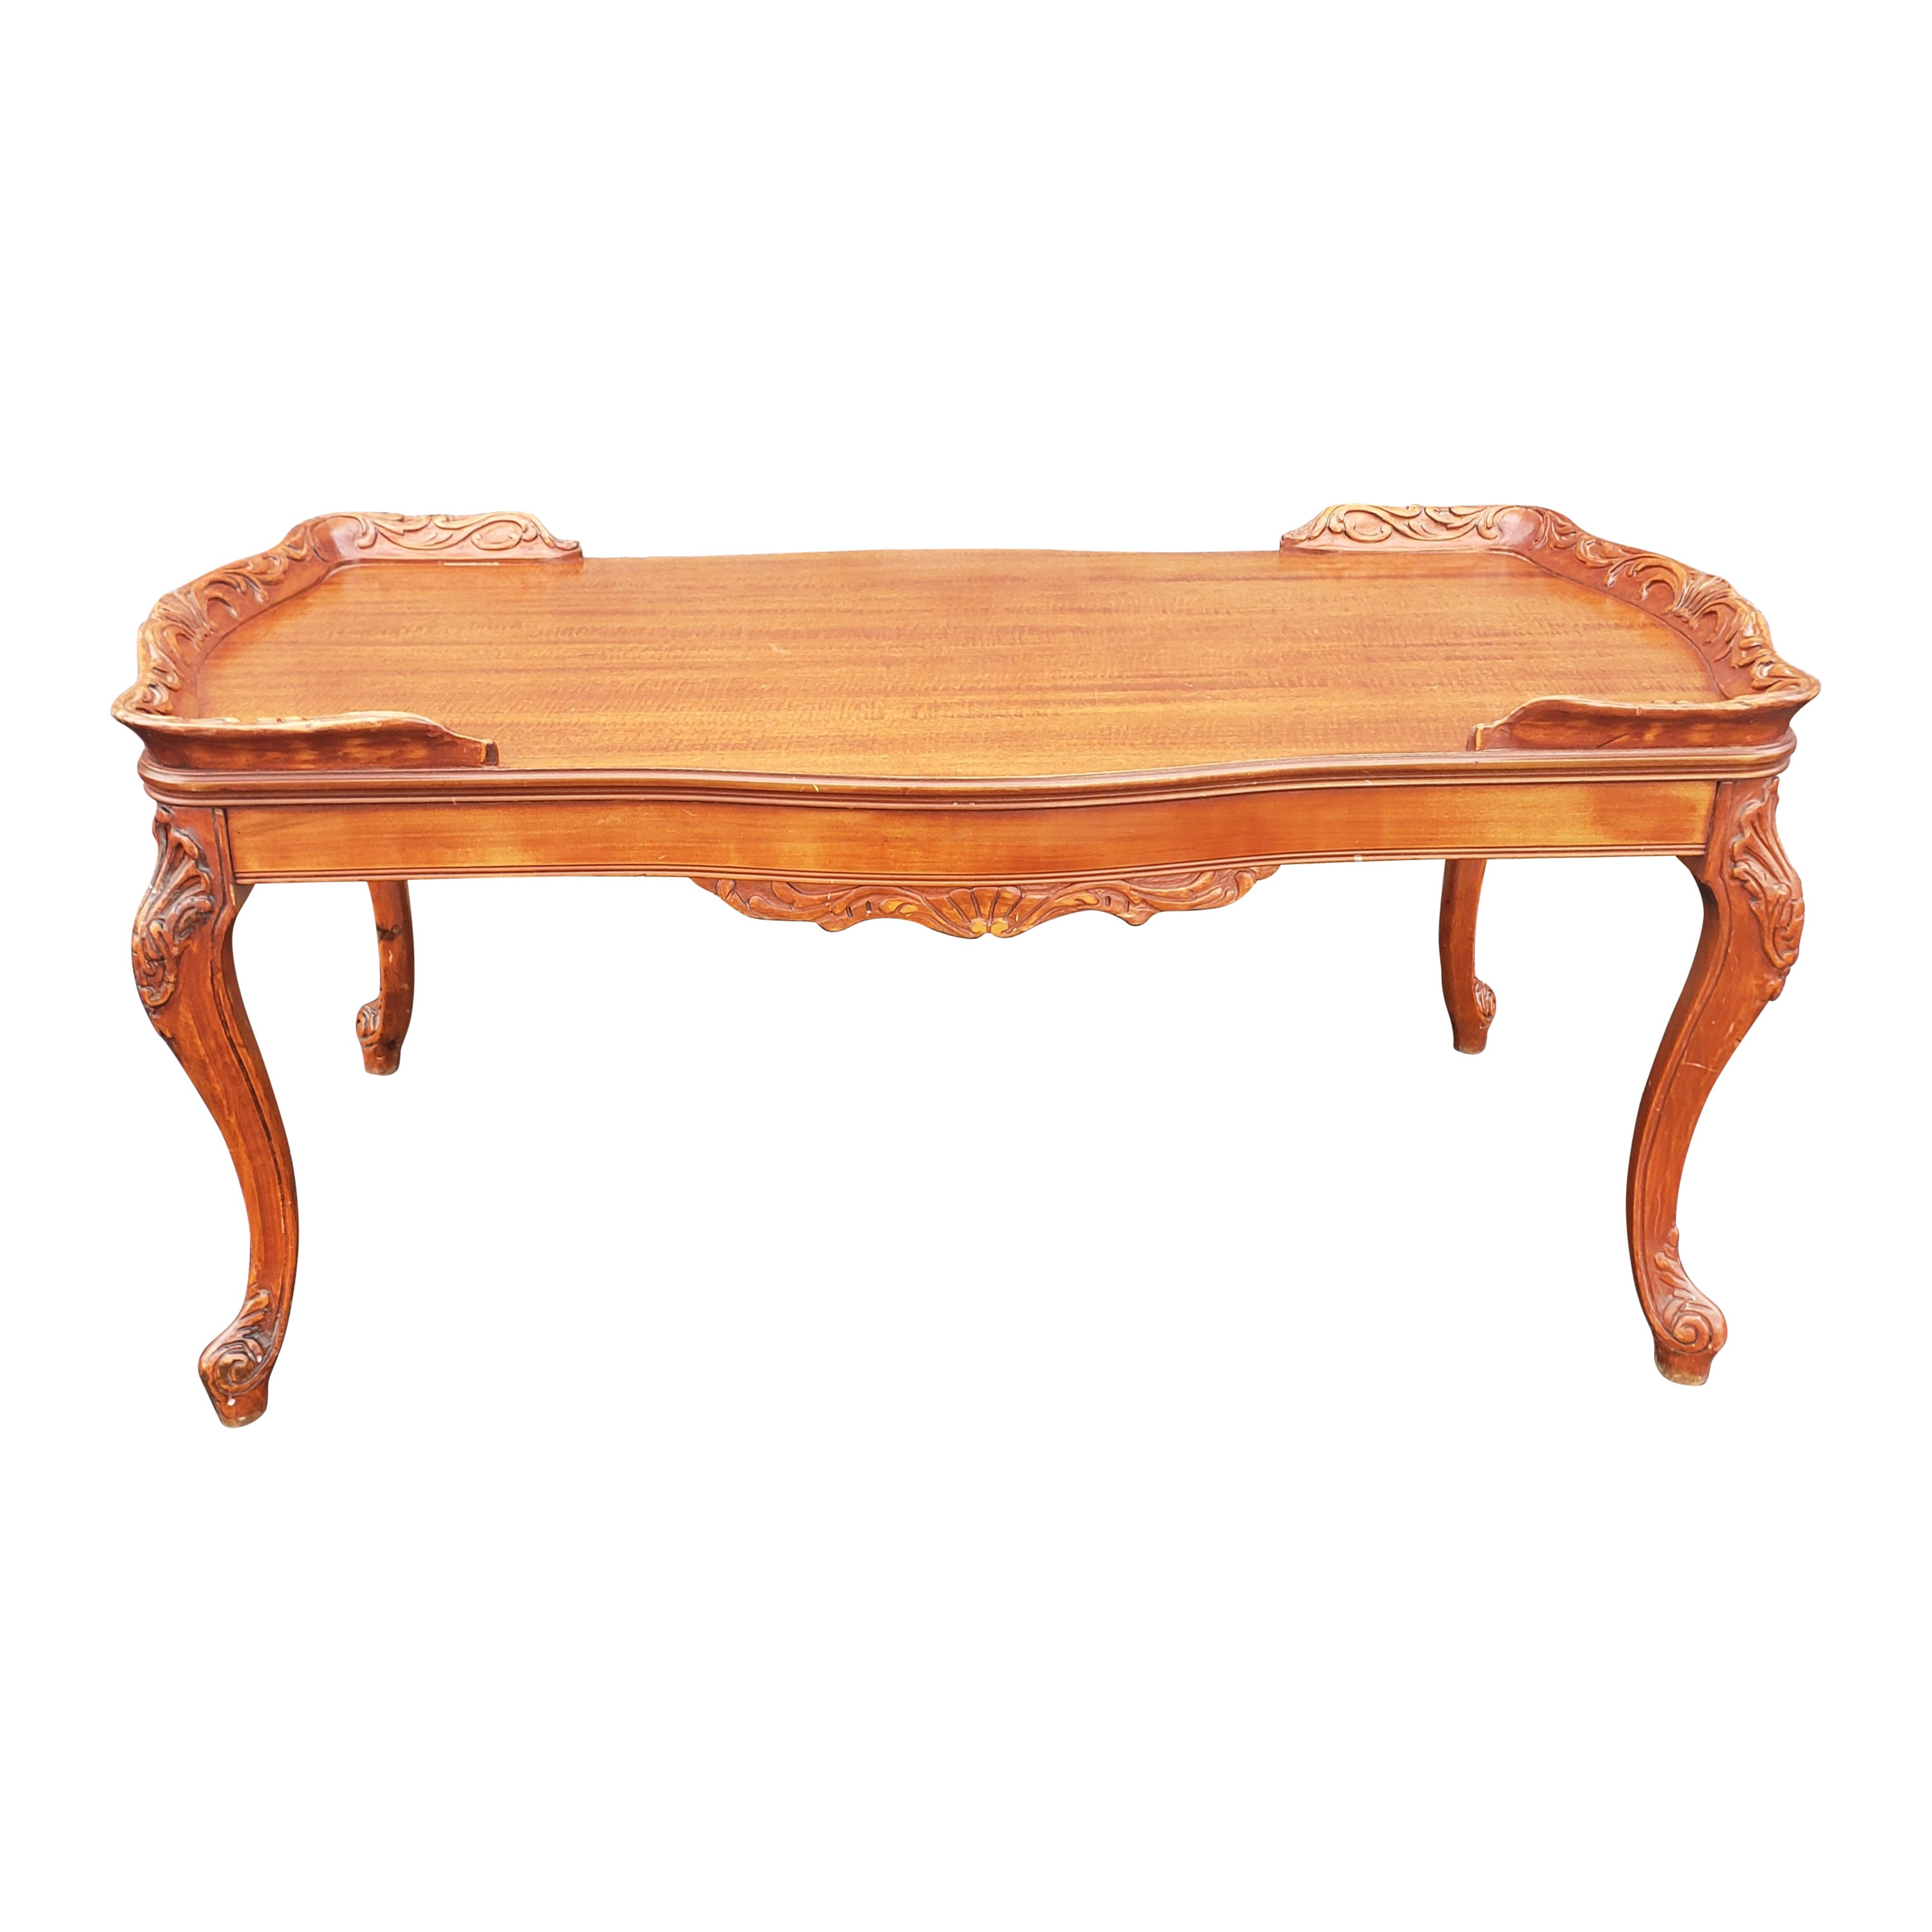 Louis XVI Style Carved Mahogany Cocktail Table with Solid Mahogany Gallery For Sale